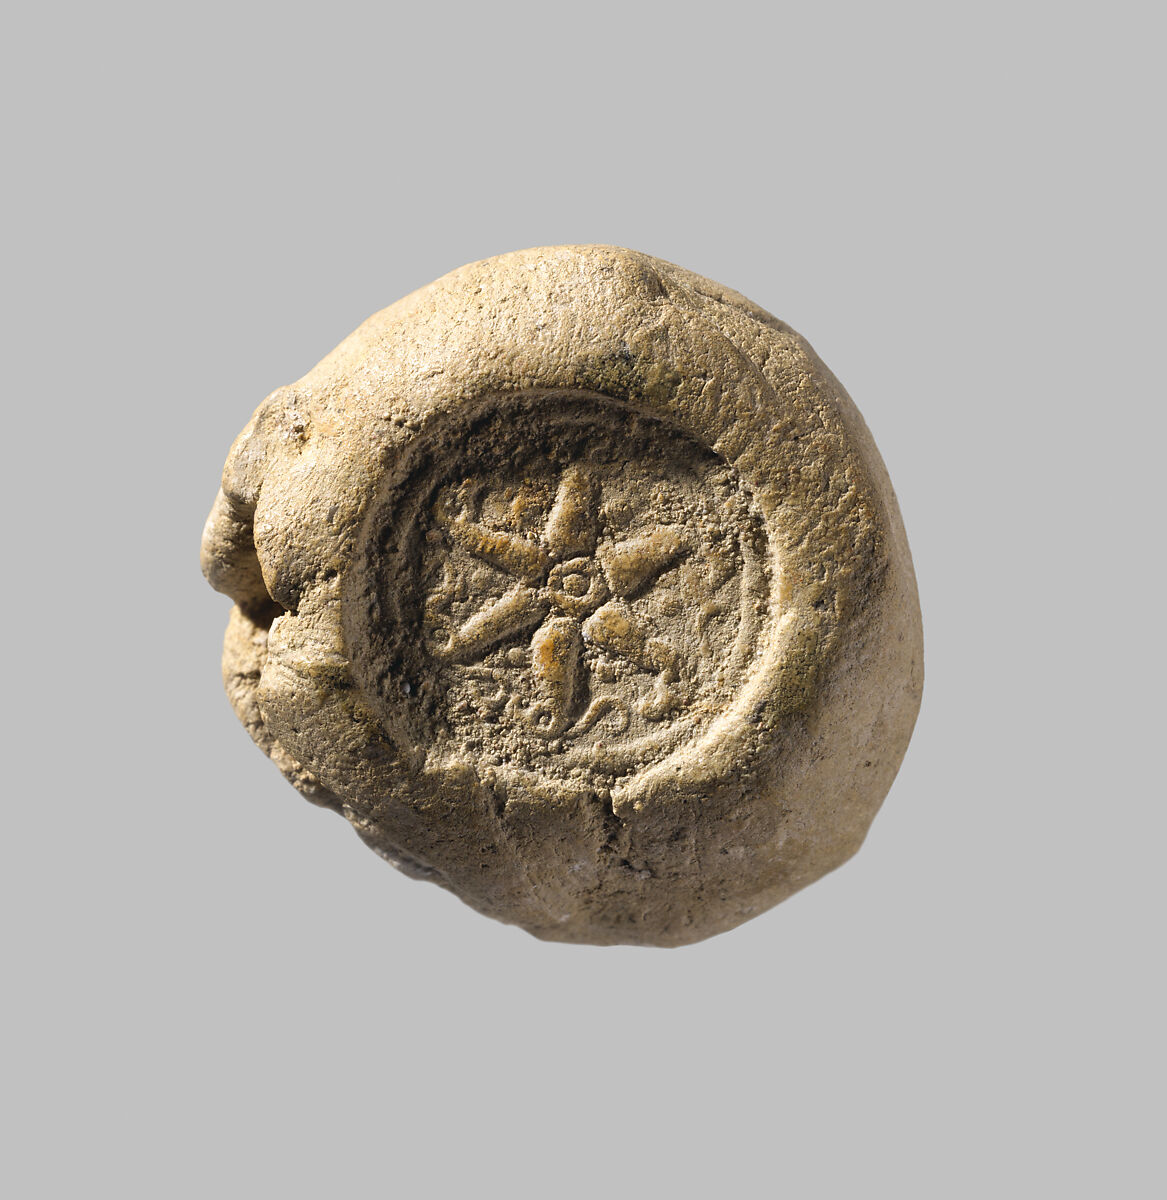 Sealing with stamp seal impressions: radiating griffins; banquet scene